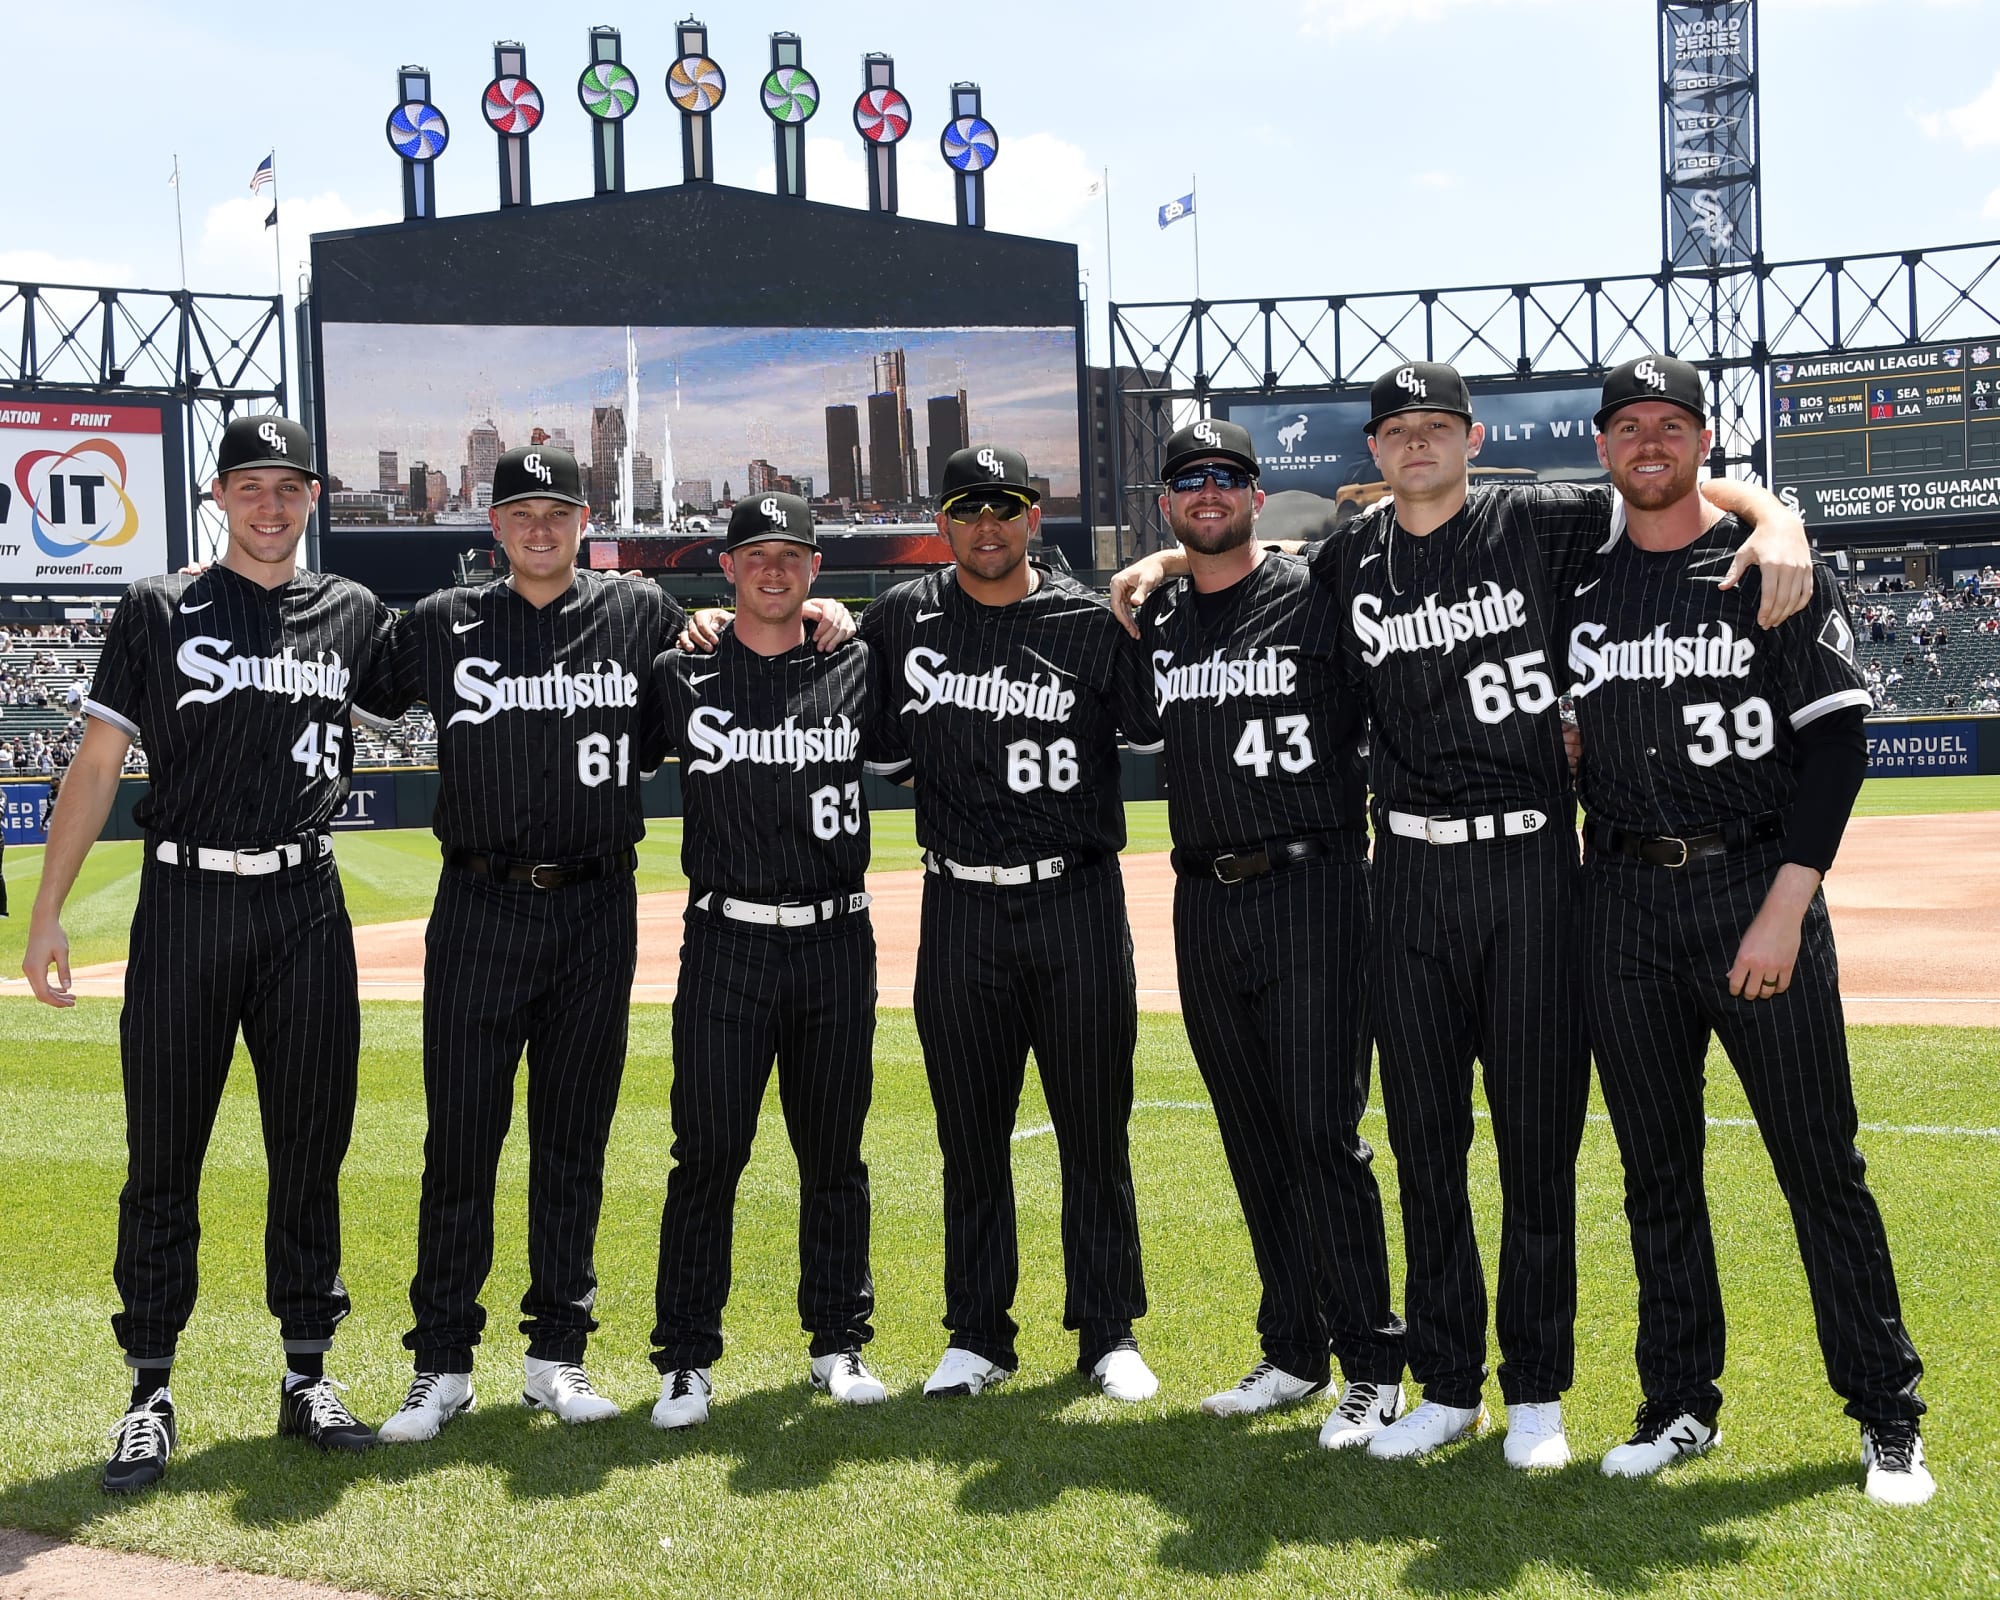 Chicago White Sox An update on the American League Central